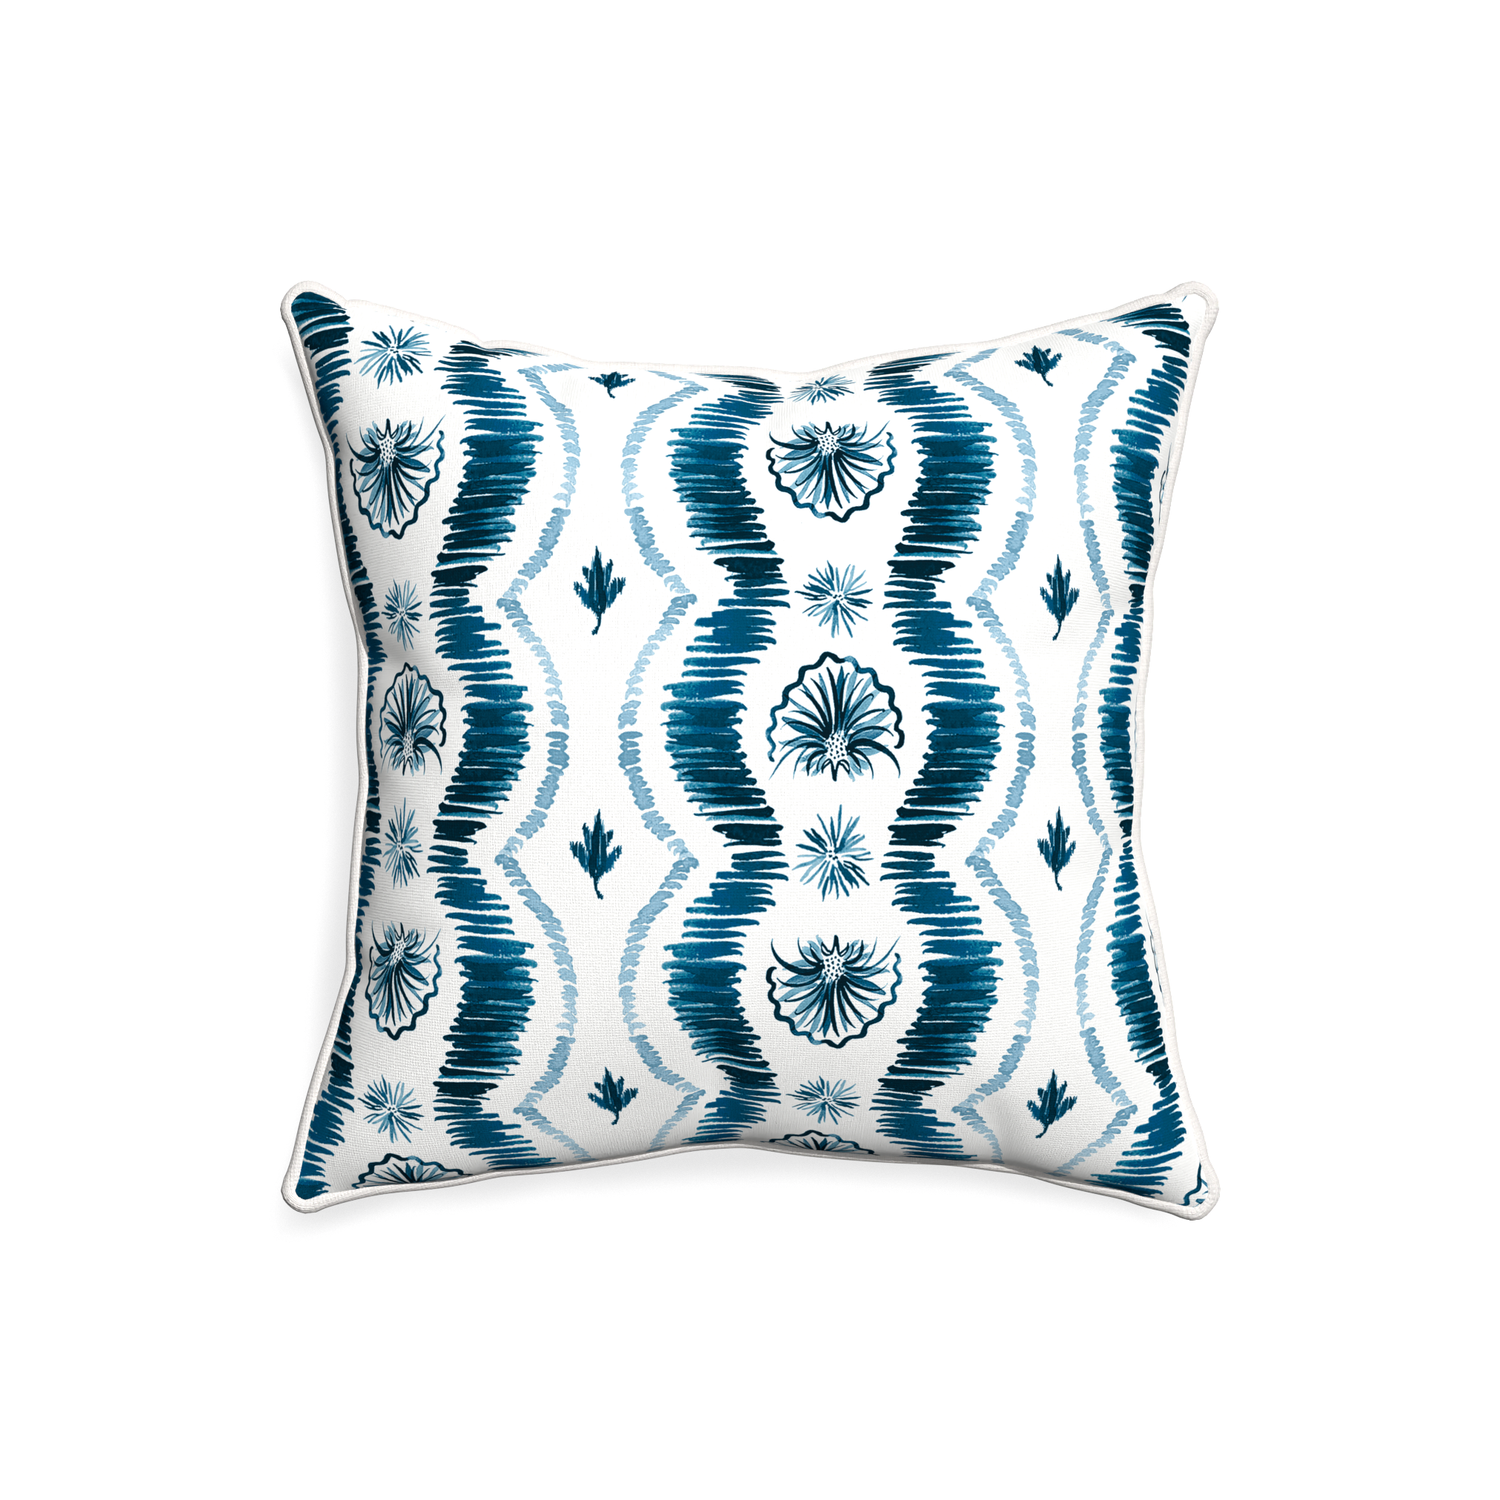 20-square alice custom blue ikatpillow with snow piping on white background